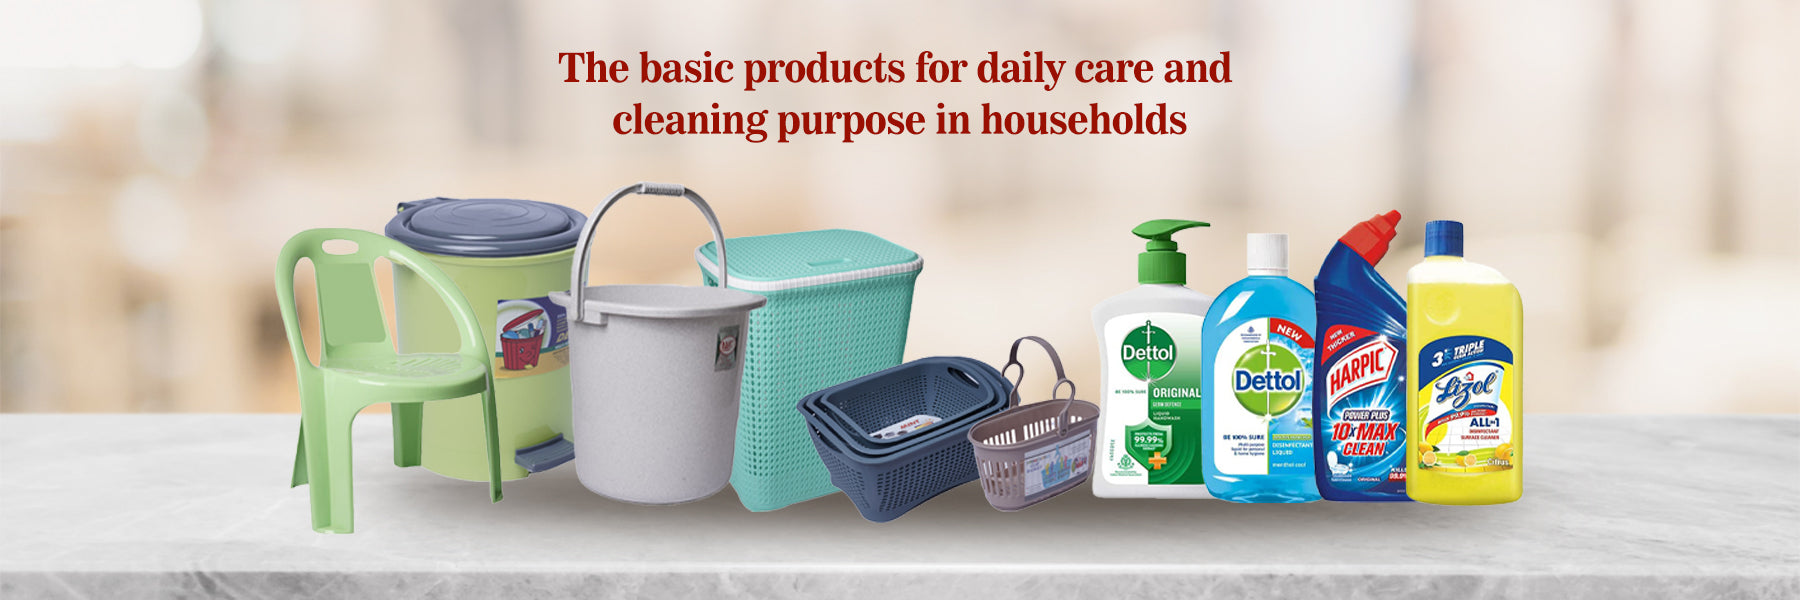 The basic products for daily care and cleaning purpose in households FromIndia.com